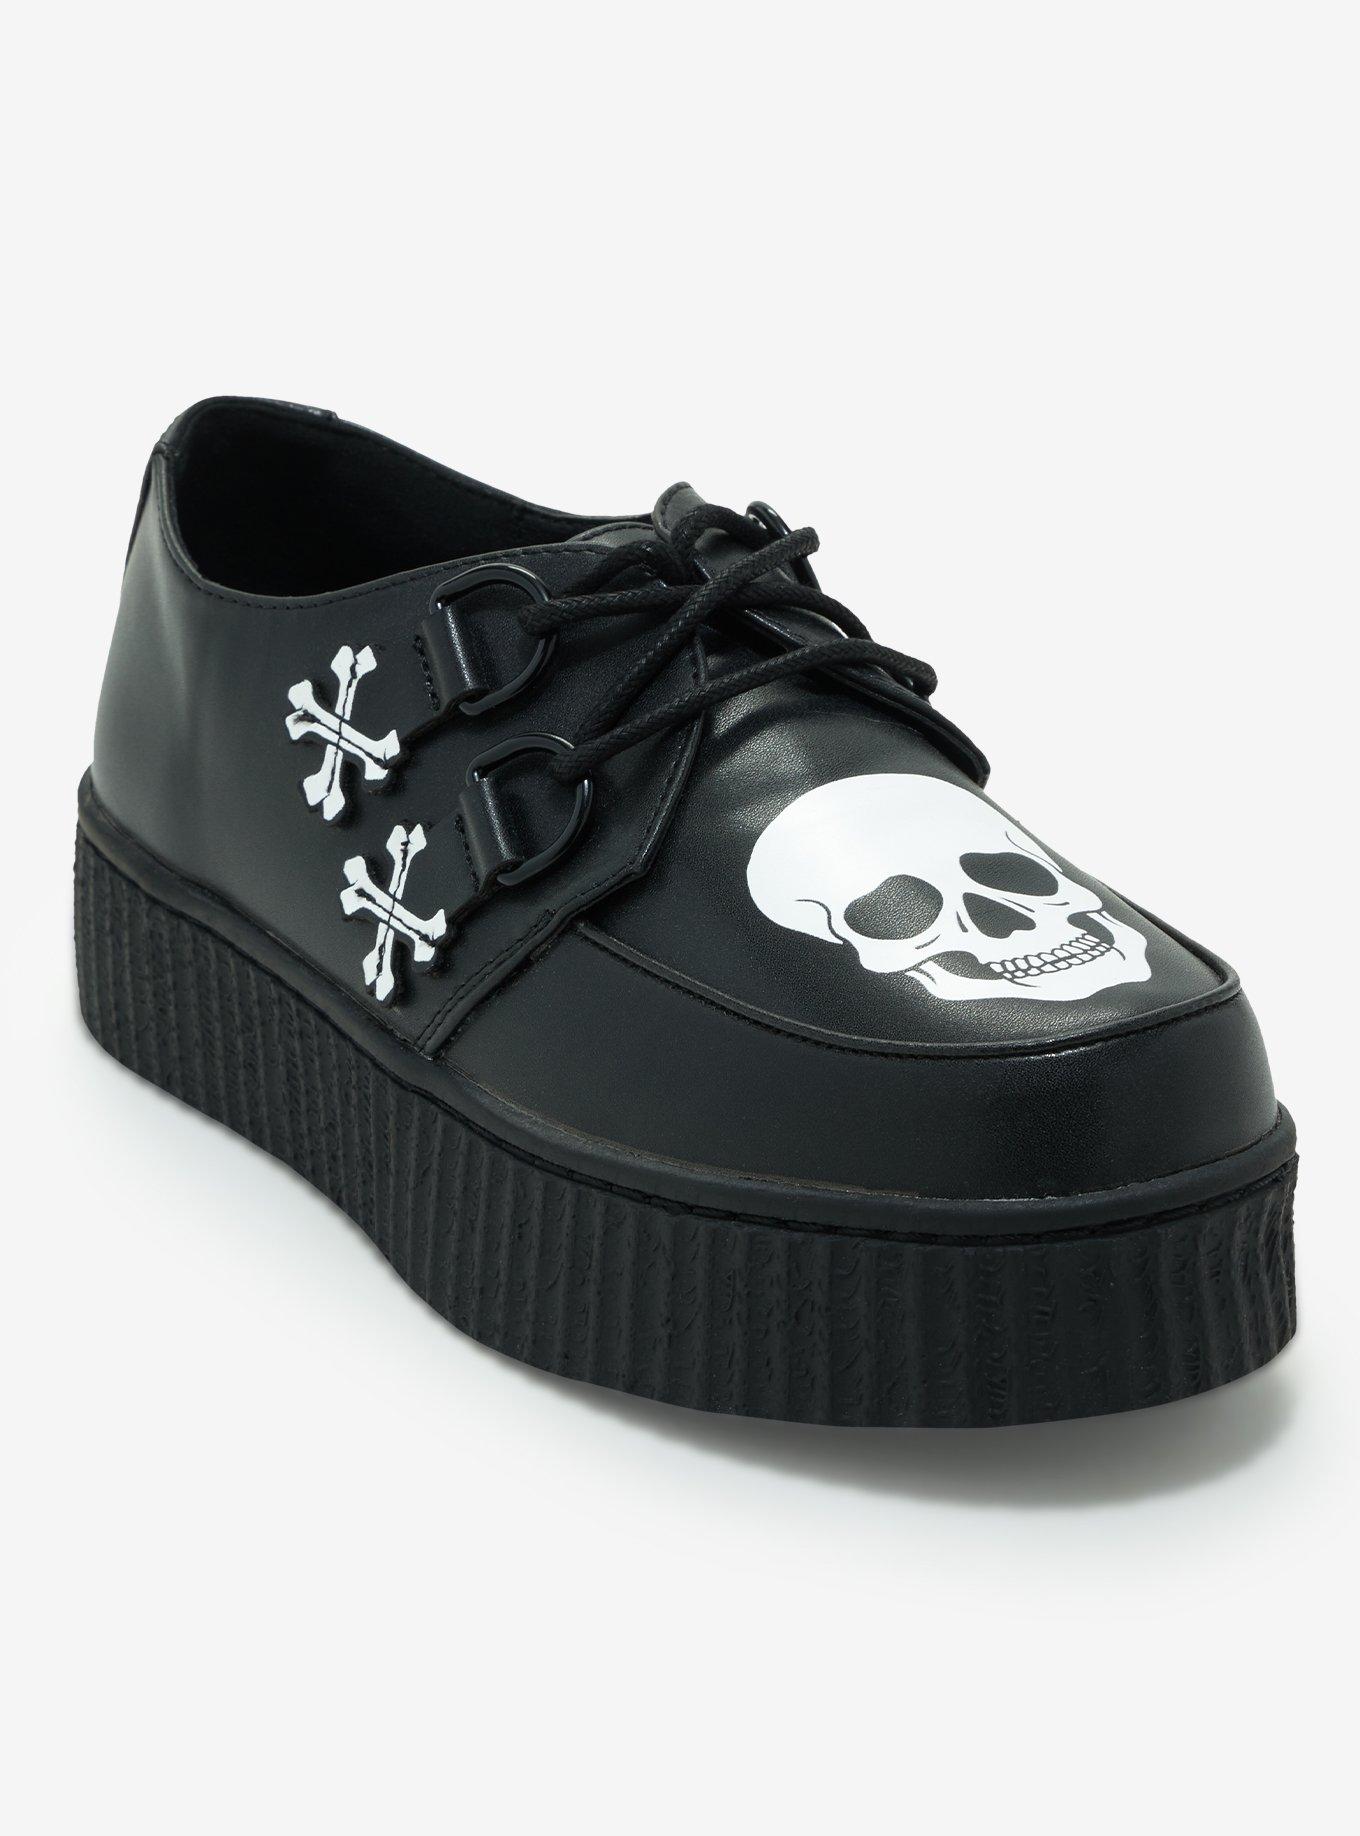 Creepers: Creeper Shoes & Plaform Creepers | Topic